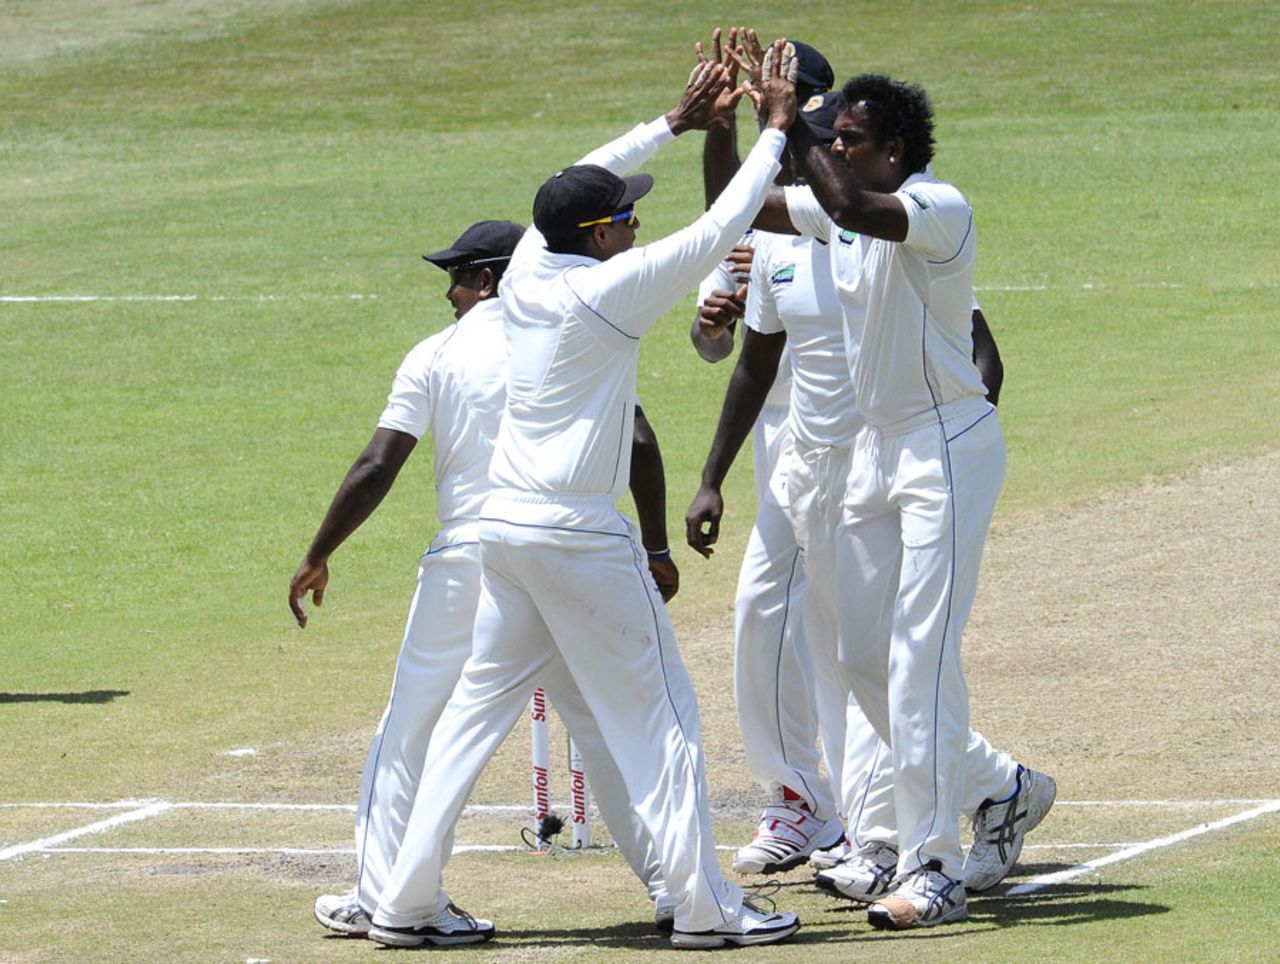 Dilhara Fernando struck in his first over, removing Graeme Smith, South Africa v Sri Lanka, 2nd Test, Durban, 4th day, December 29, 2011